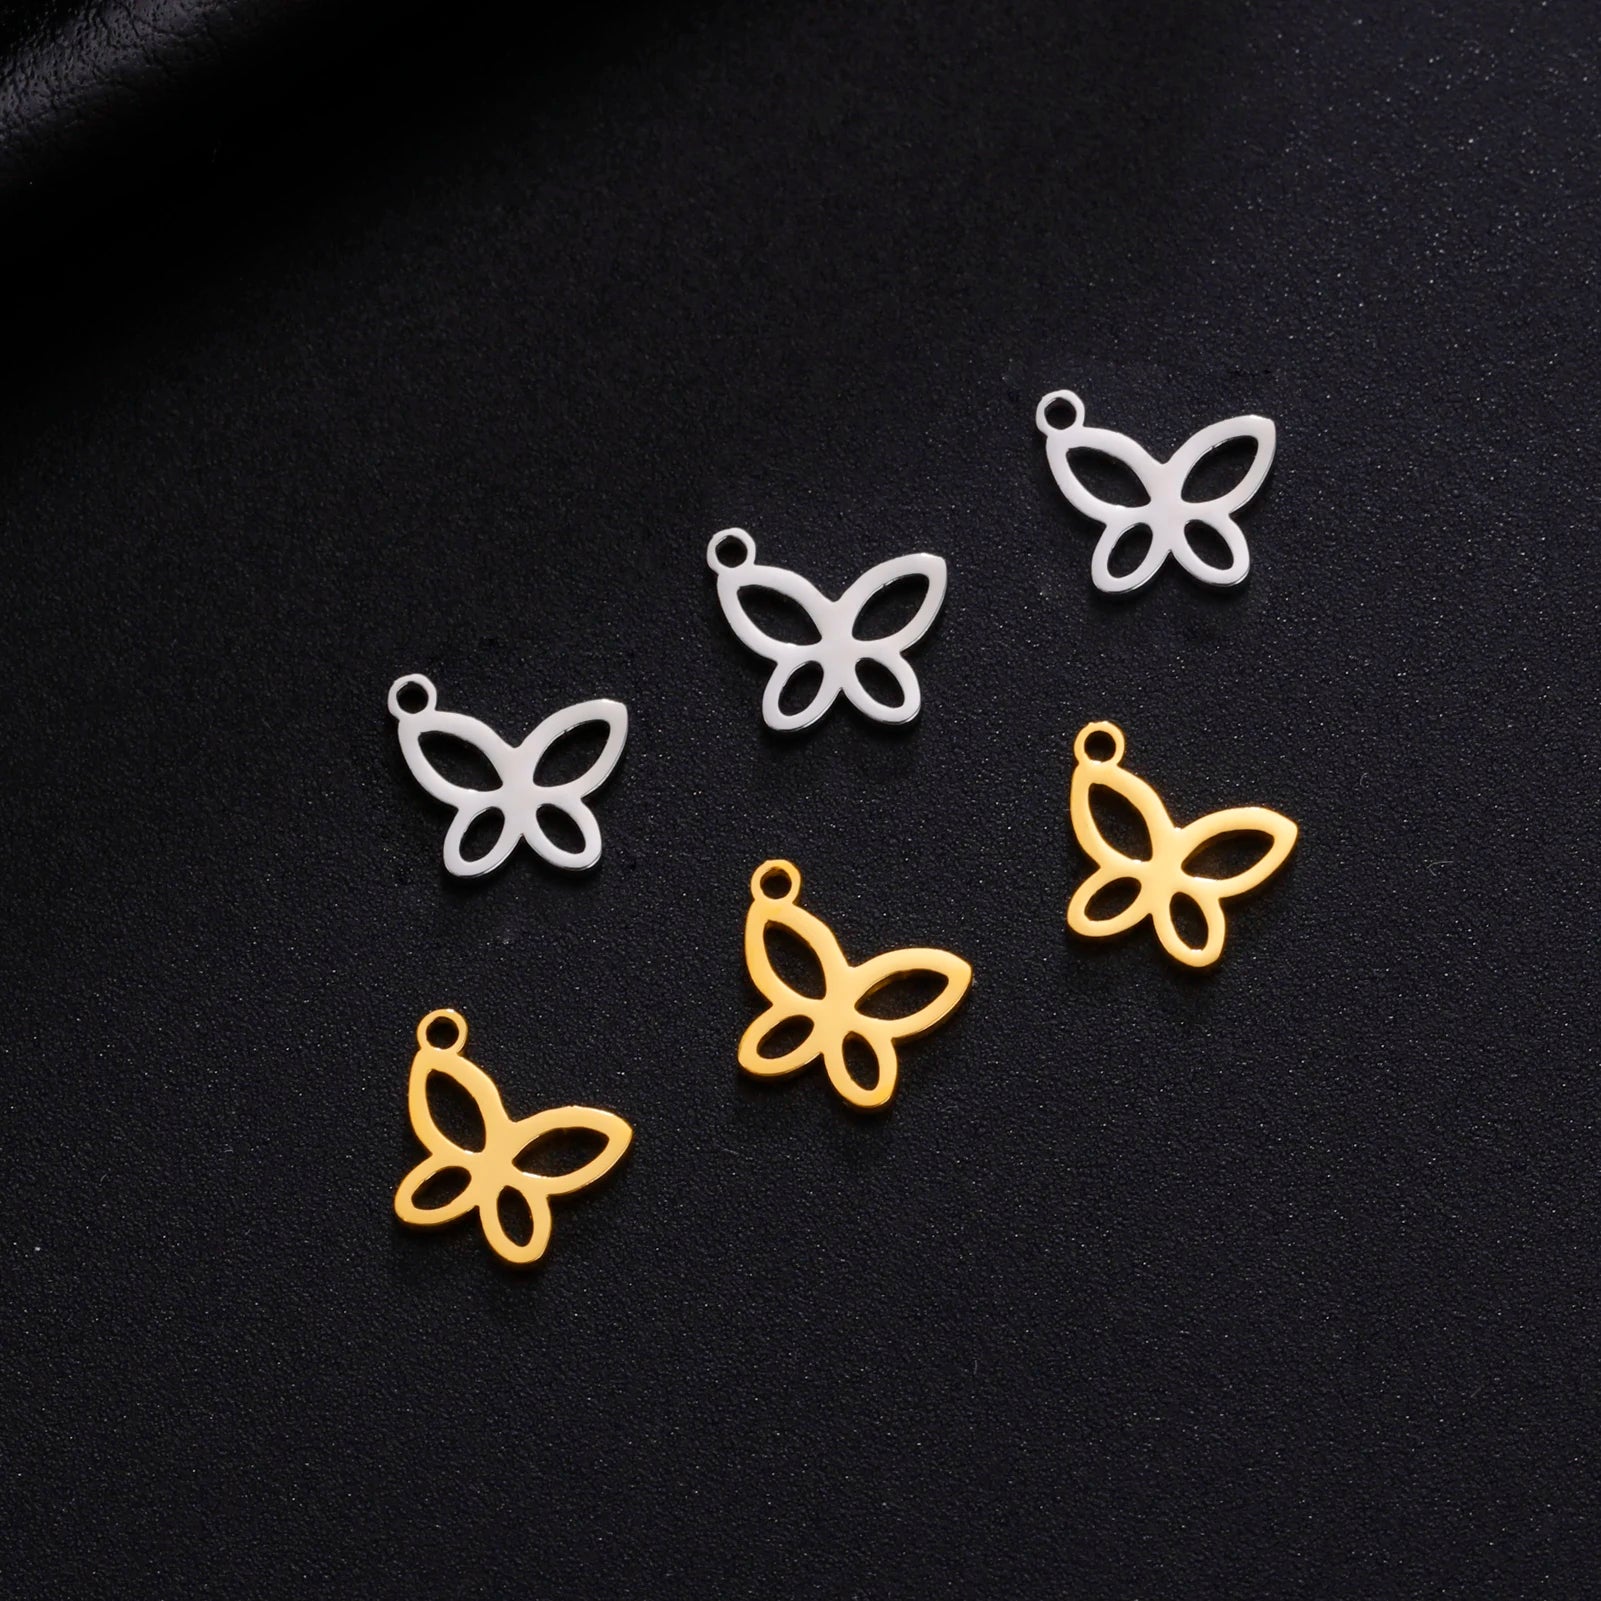 5PCS Butterfly Pendant Charm Earrings Necklace Stainless Steel Women'sSPECIFICATIONSBrand Name: NoneOrigin: Mainland ChinaMetals Type: Stainless SteelCharms Type: AnimalsFine or Fashion: FashionModel Number: Butterfly Pendant CharmMateJewelry CirclesJewelry Circles5PCS Butterfly Pendant Charm Earrings Necklace Stainless Steel Women'